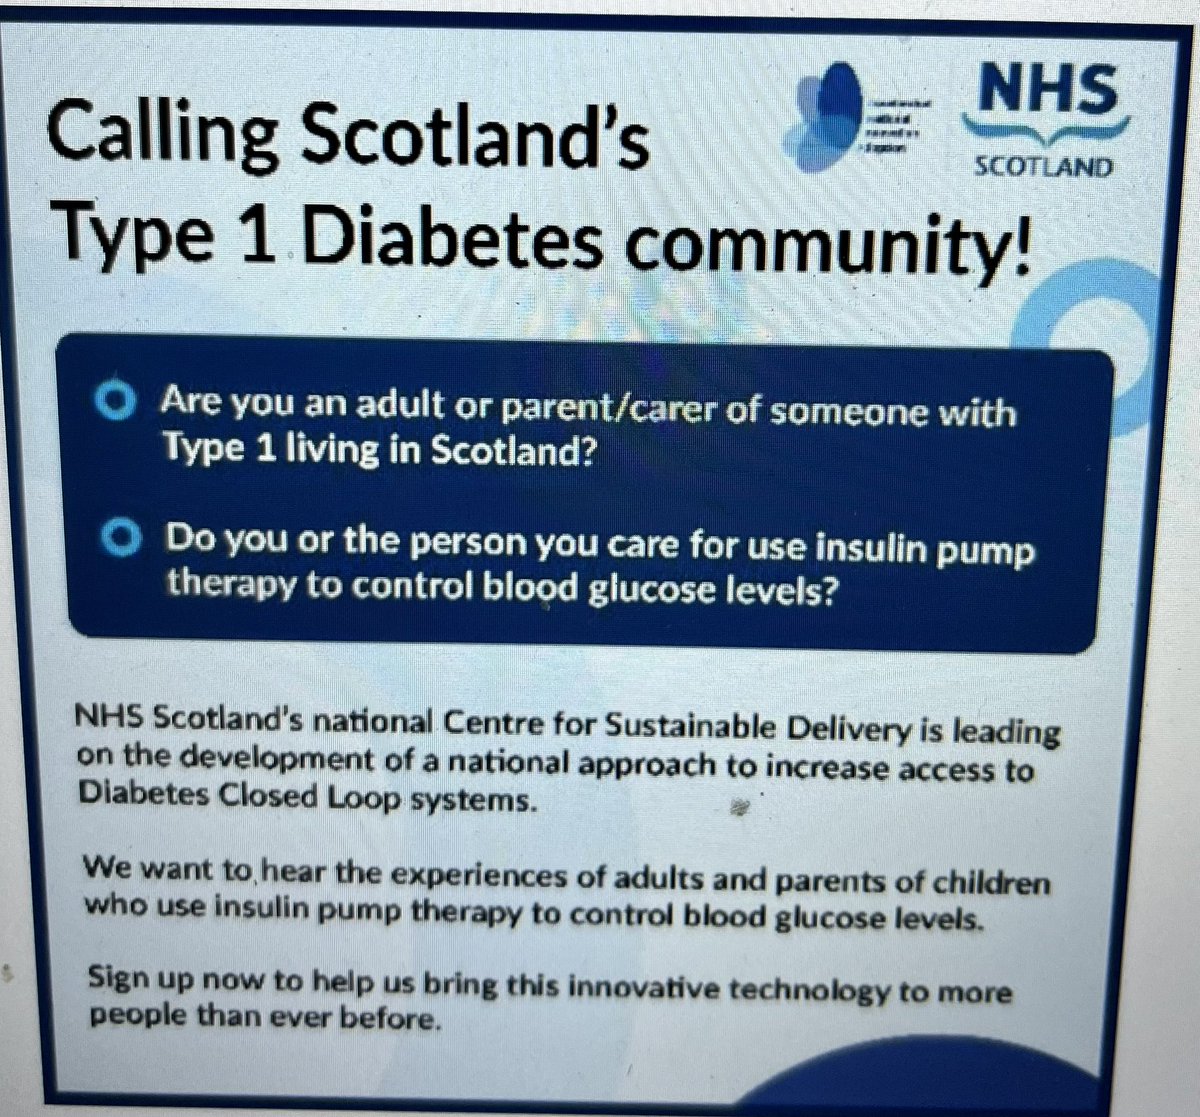 @JubileeHospital @NHSScotCfSD @online_his @KatieDuncanRD @JulieNicol9 @JacqWalkerRD 
🧵1/6 Calling Scotland’s #Type1Diabetes community. Are you an adult or parent/carer of someone with #Type1Diabetes living in Scotland?